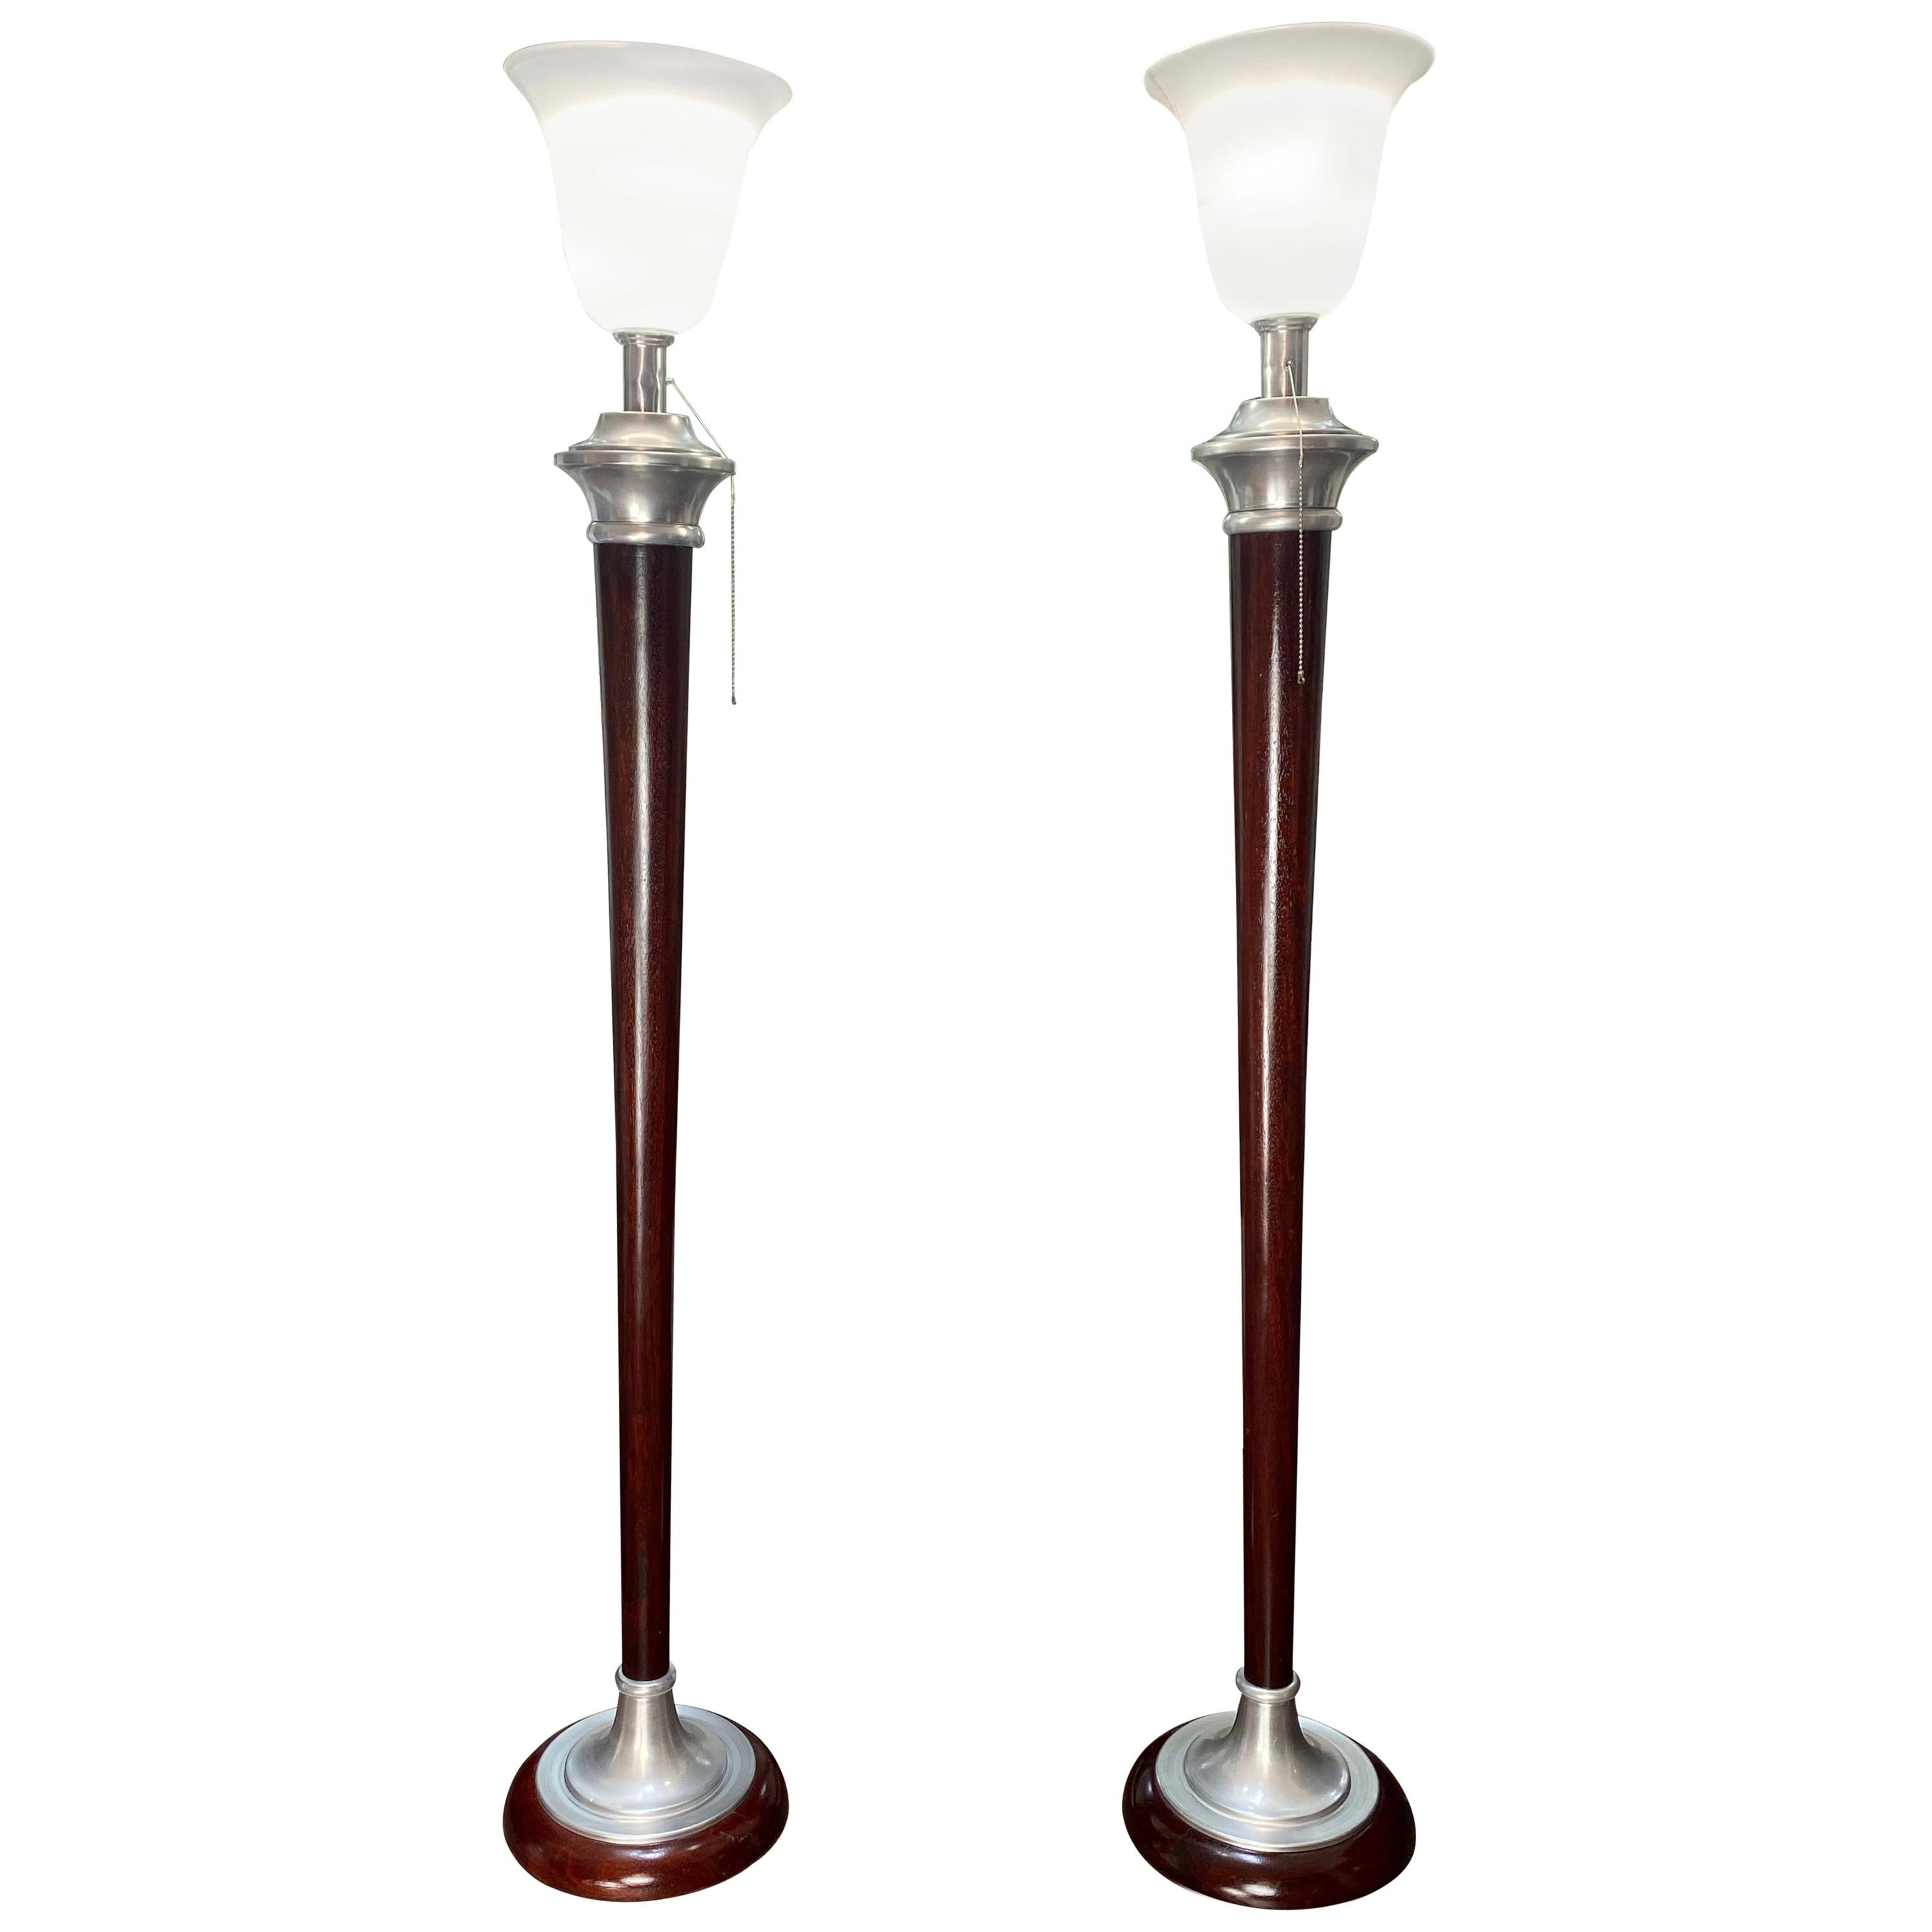 1930s Art Deco Mazda Floor Lamps with Original Stamp, Pair of Torchiere Lamps For Sale